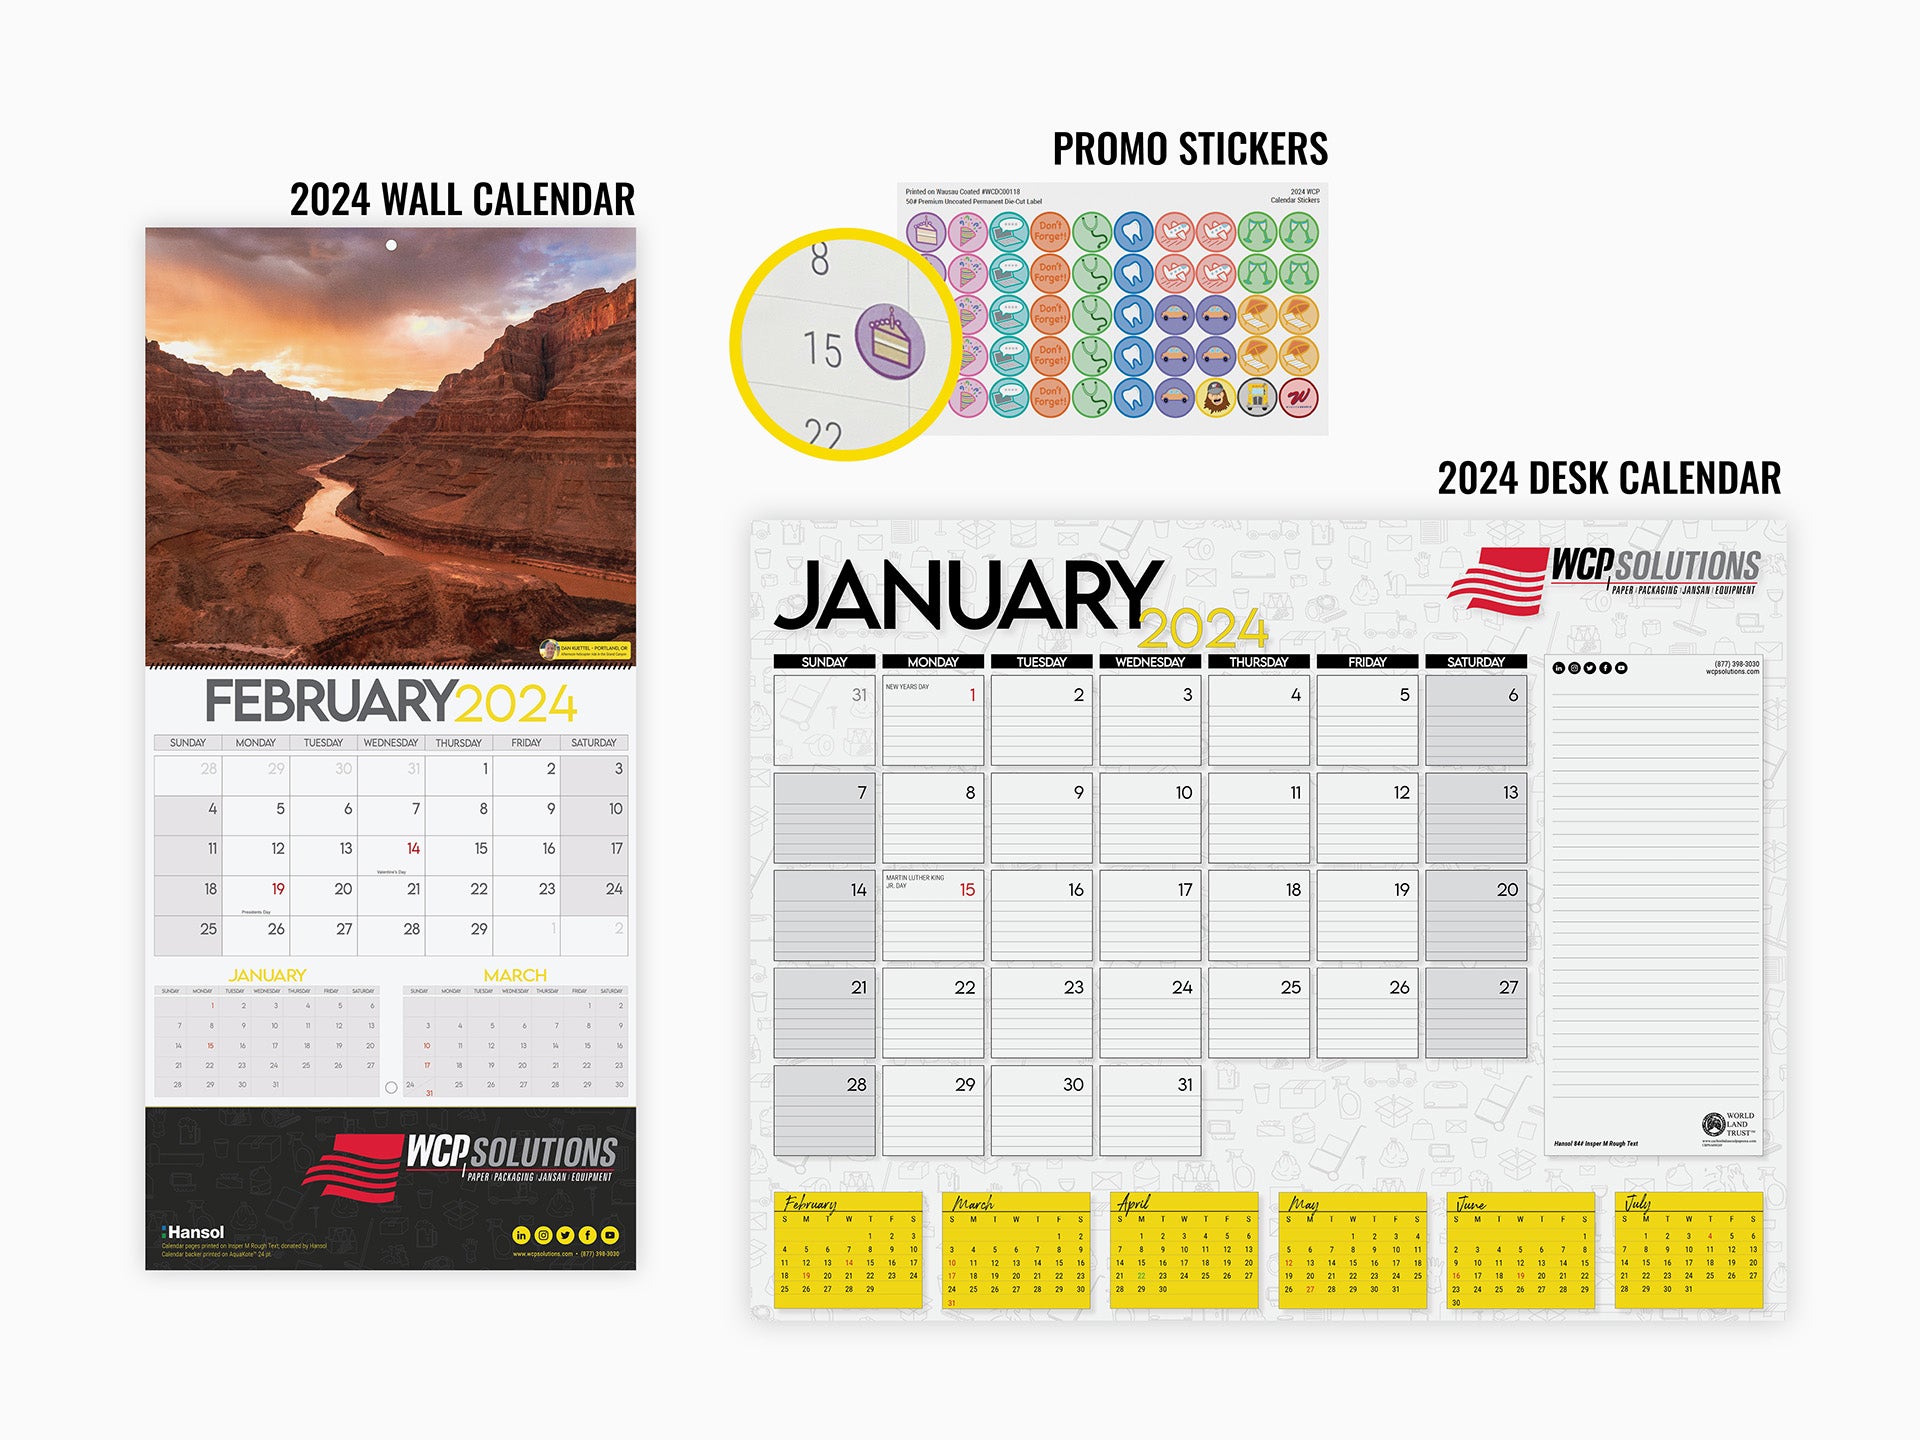 Calendar and Sticker Mockup WCP Solutions